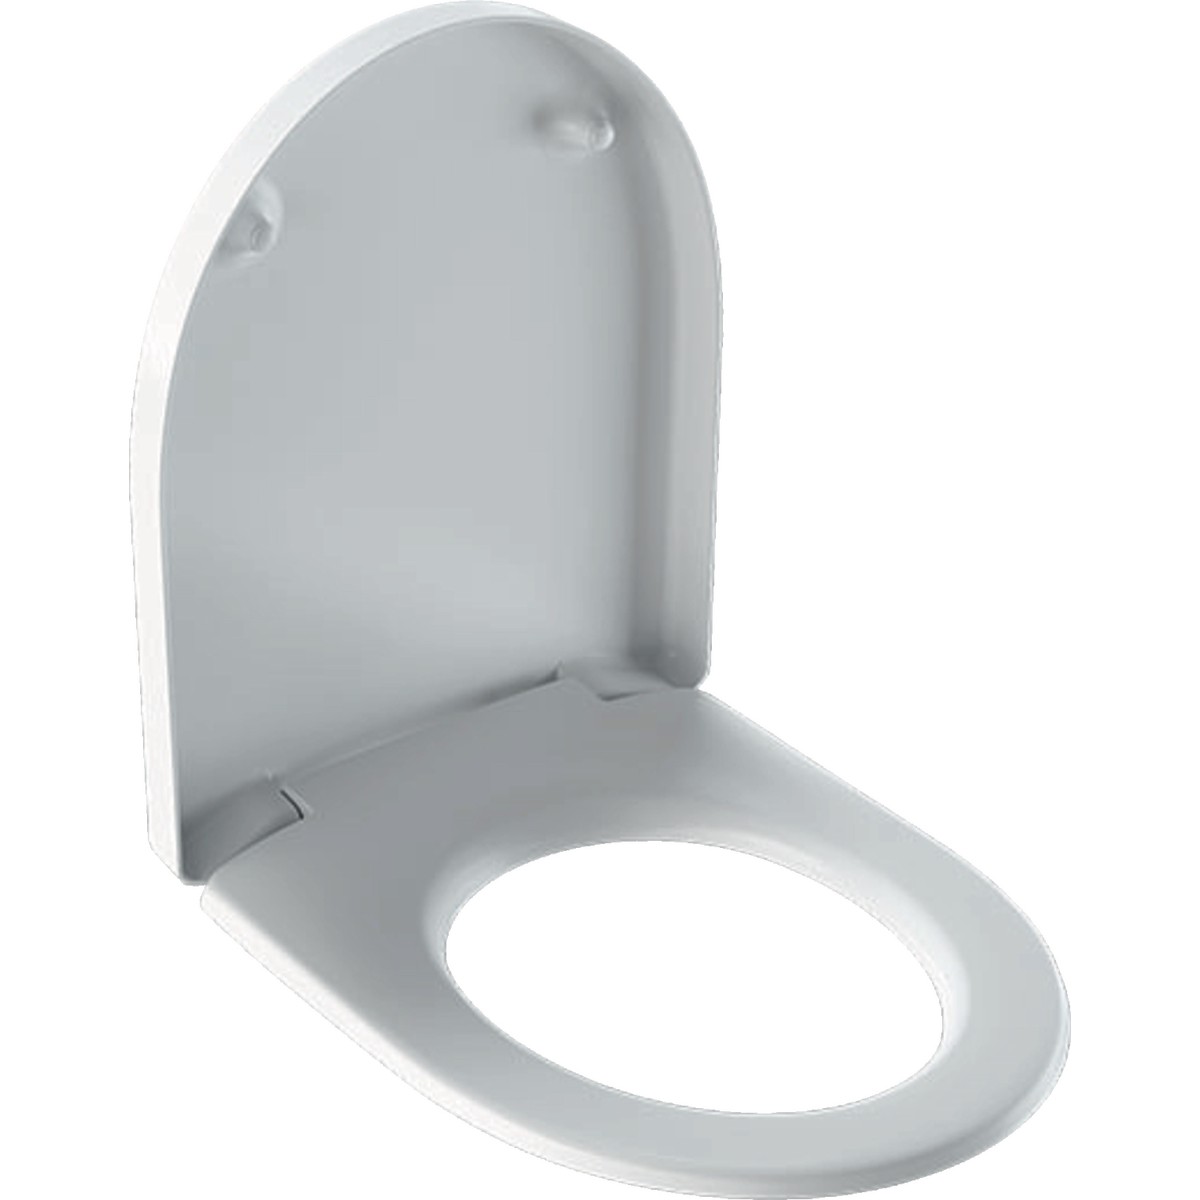 Geberit iCon Seat and cover - White [574120000]